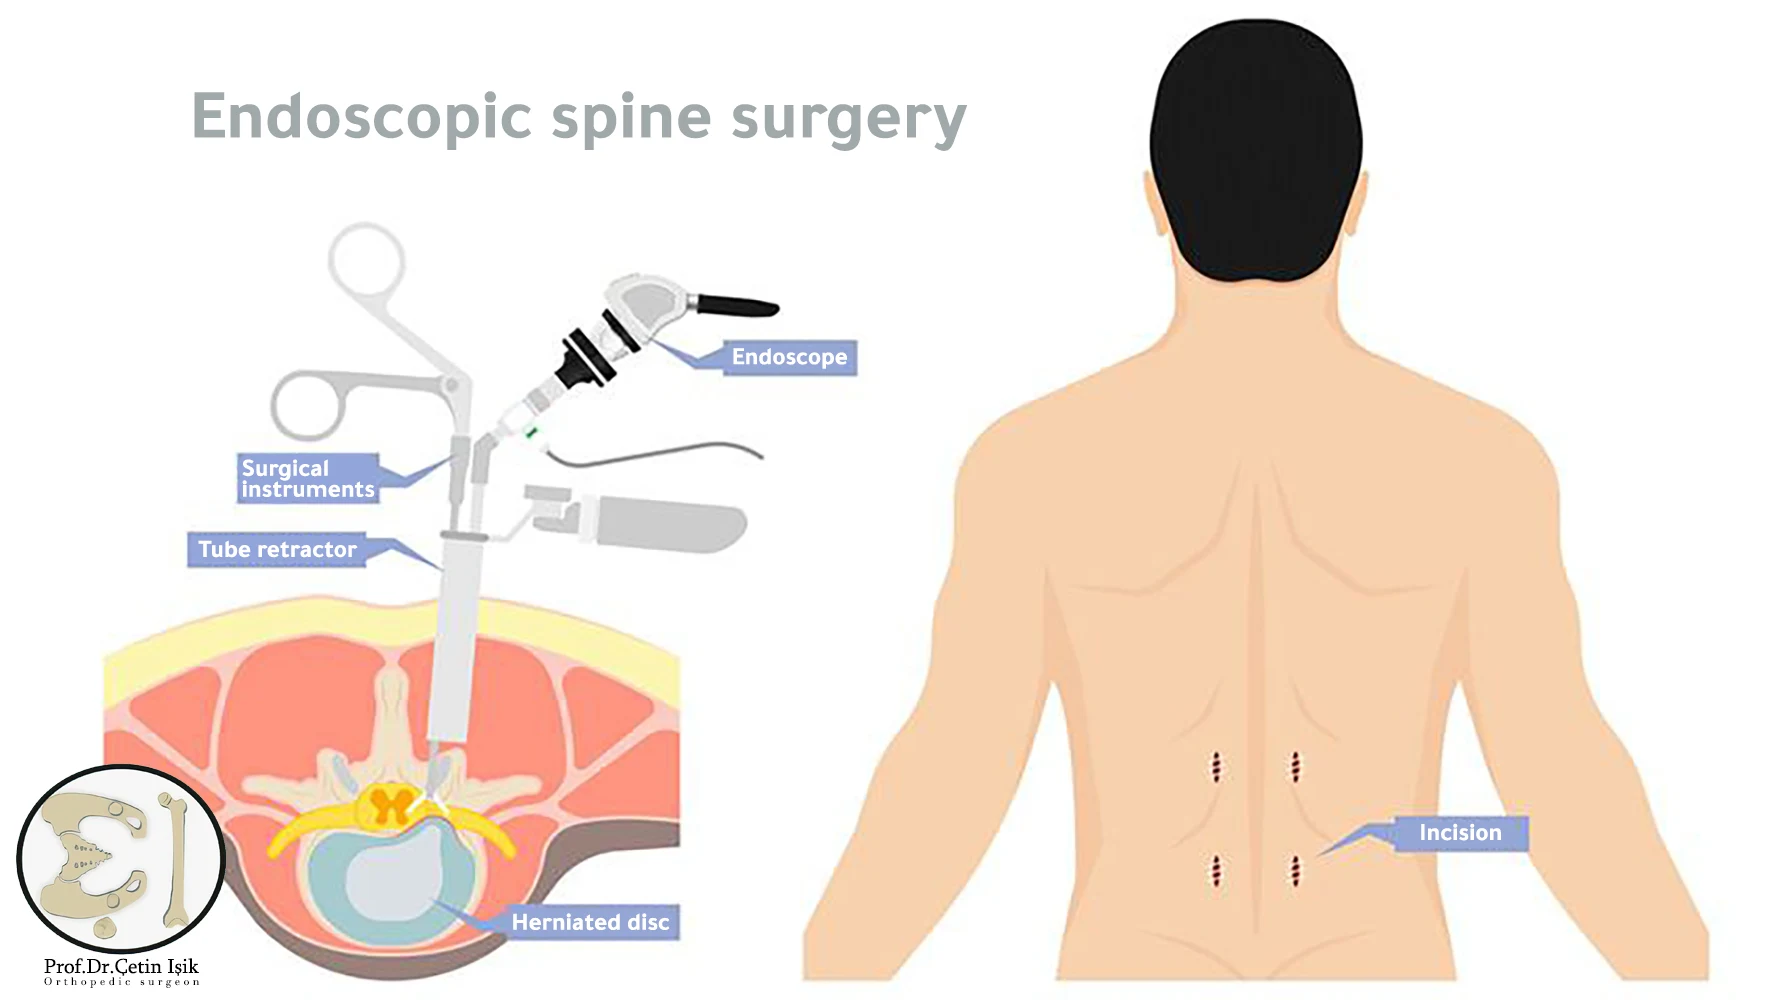 The picture shows how to operate a herniated disc using an endoscope and a small incision.